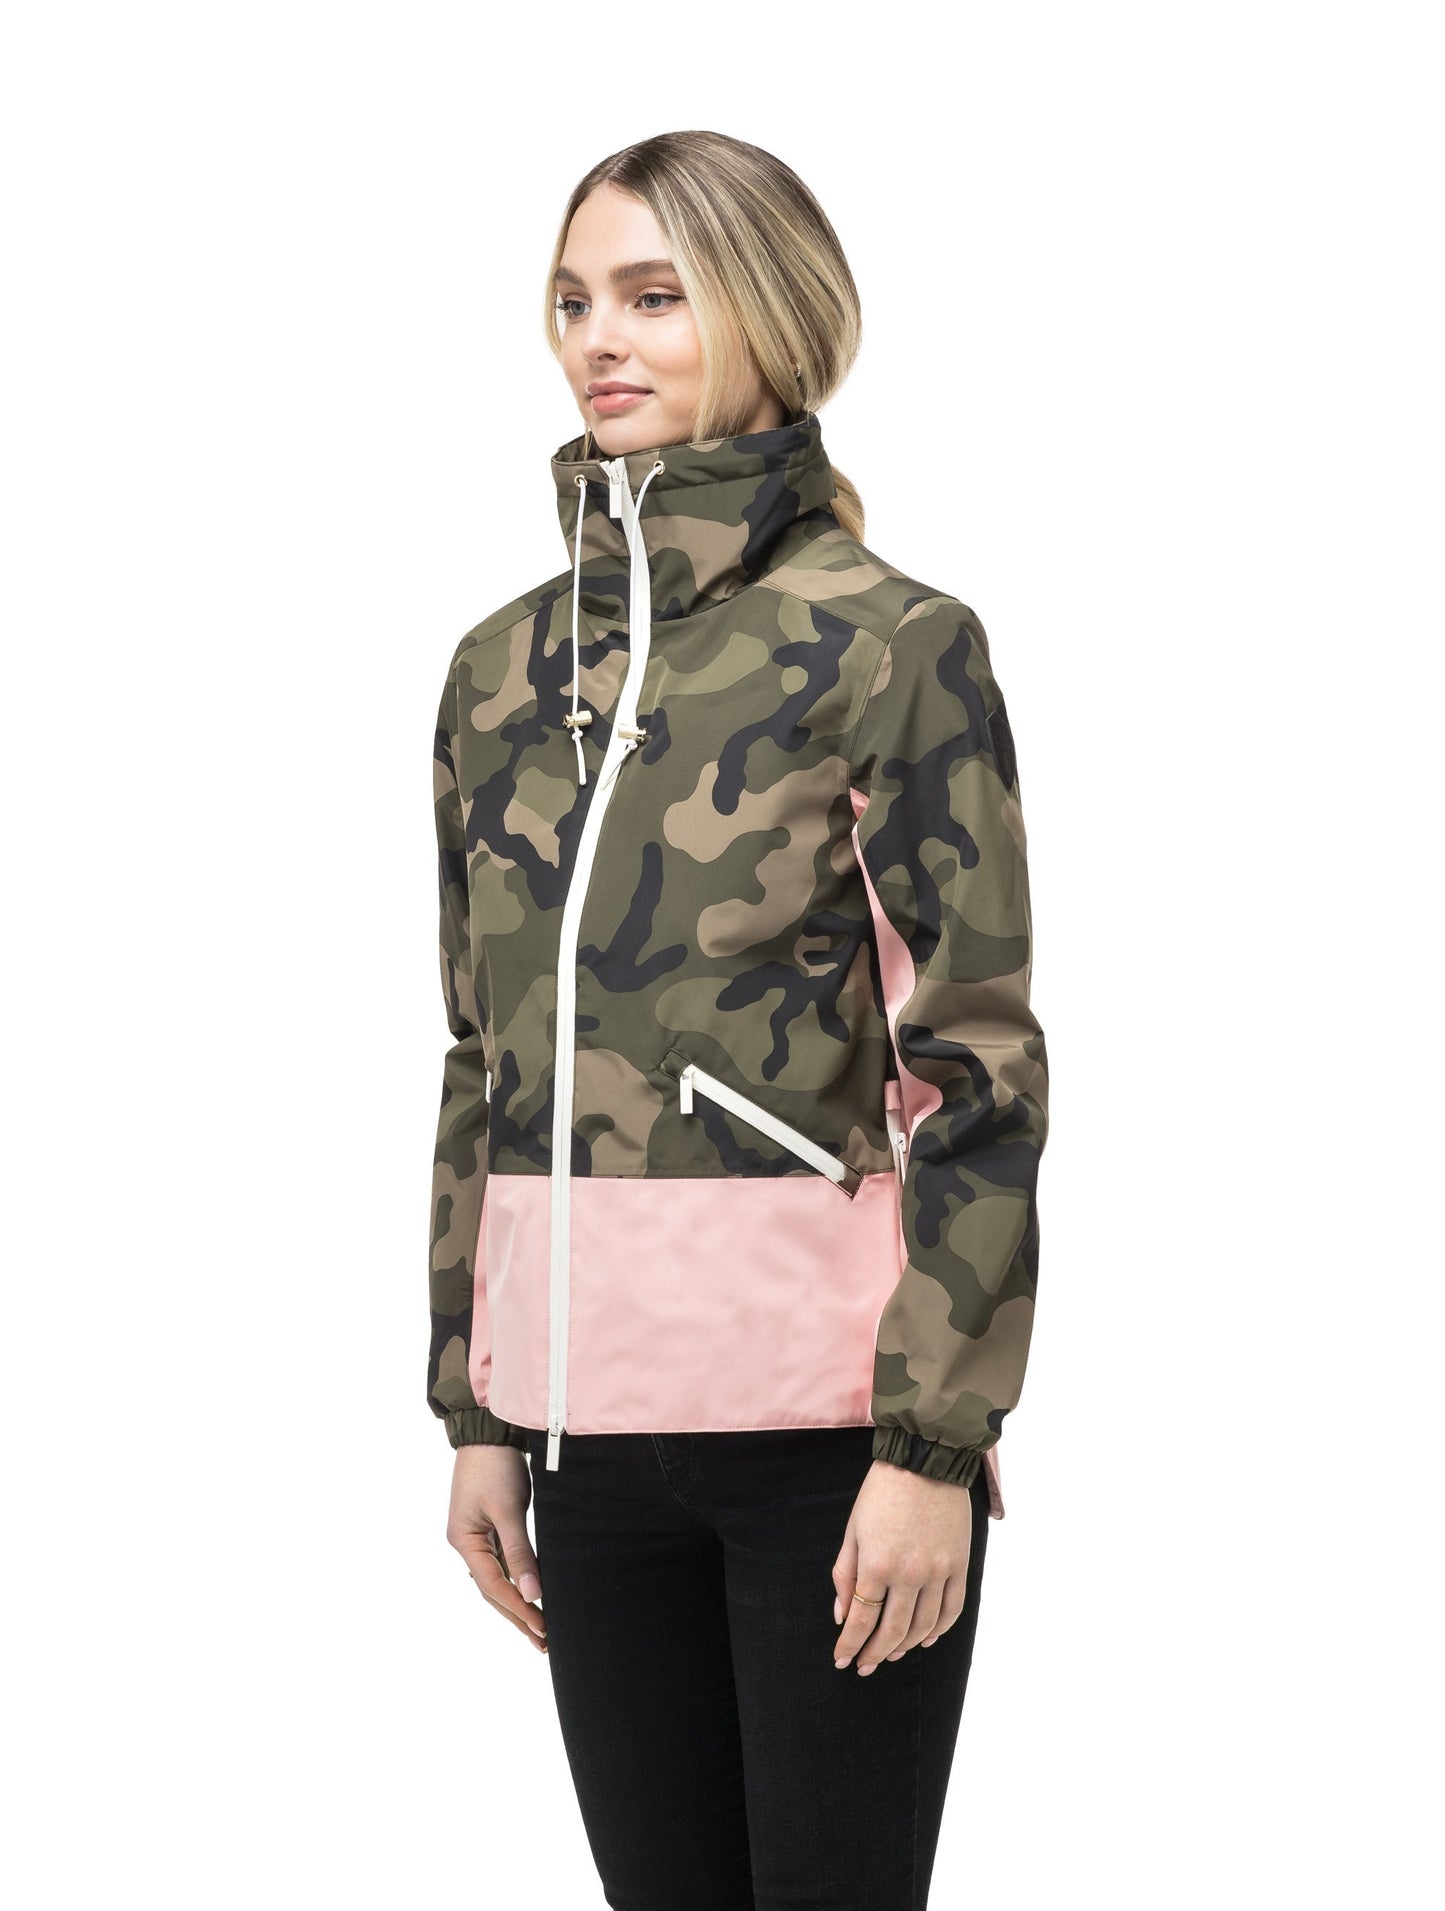 Leah waist length women's jacket in the Camo/Shell Pink color